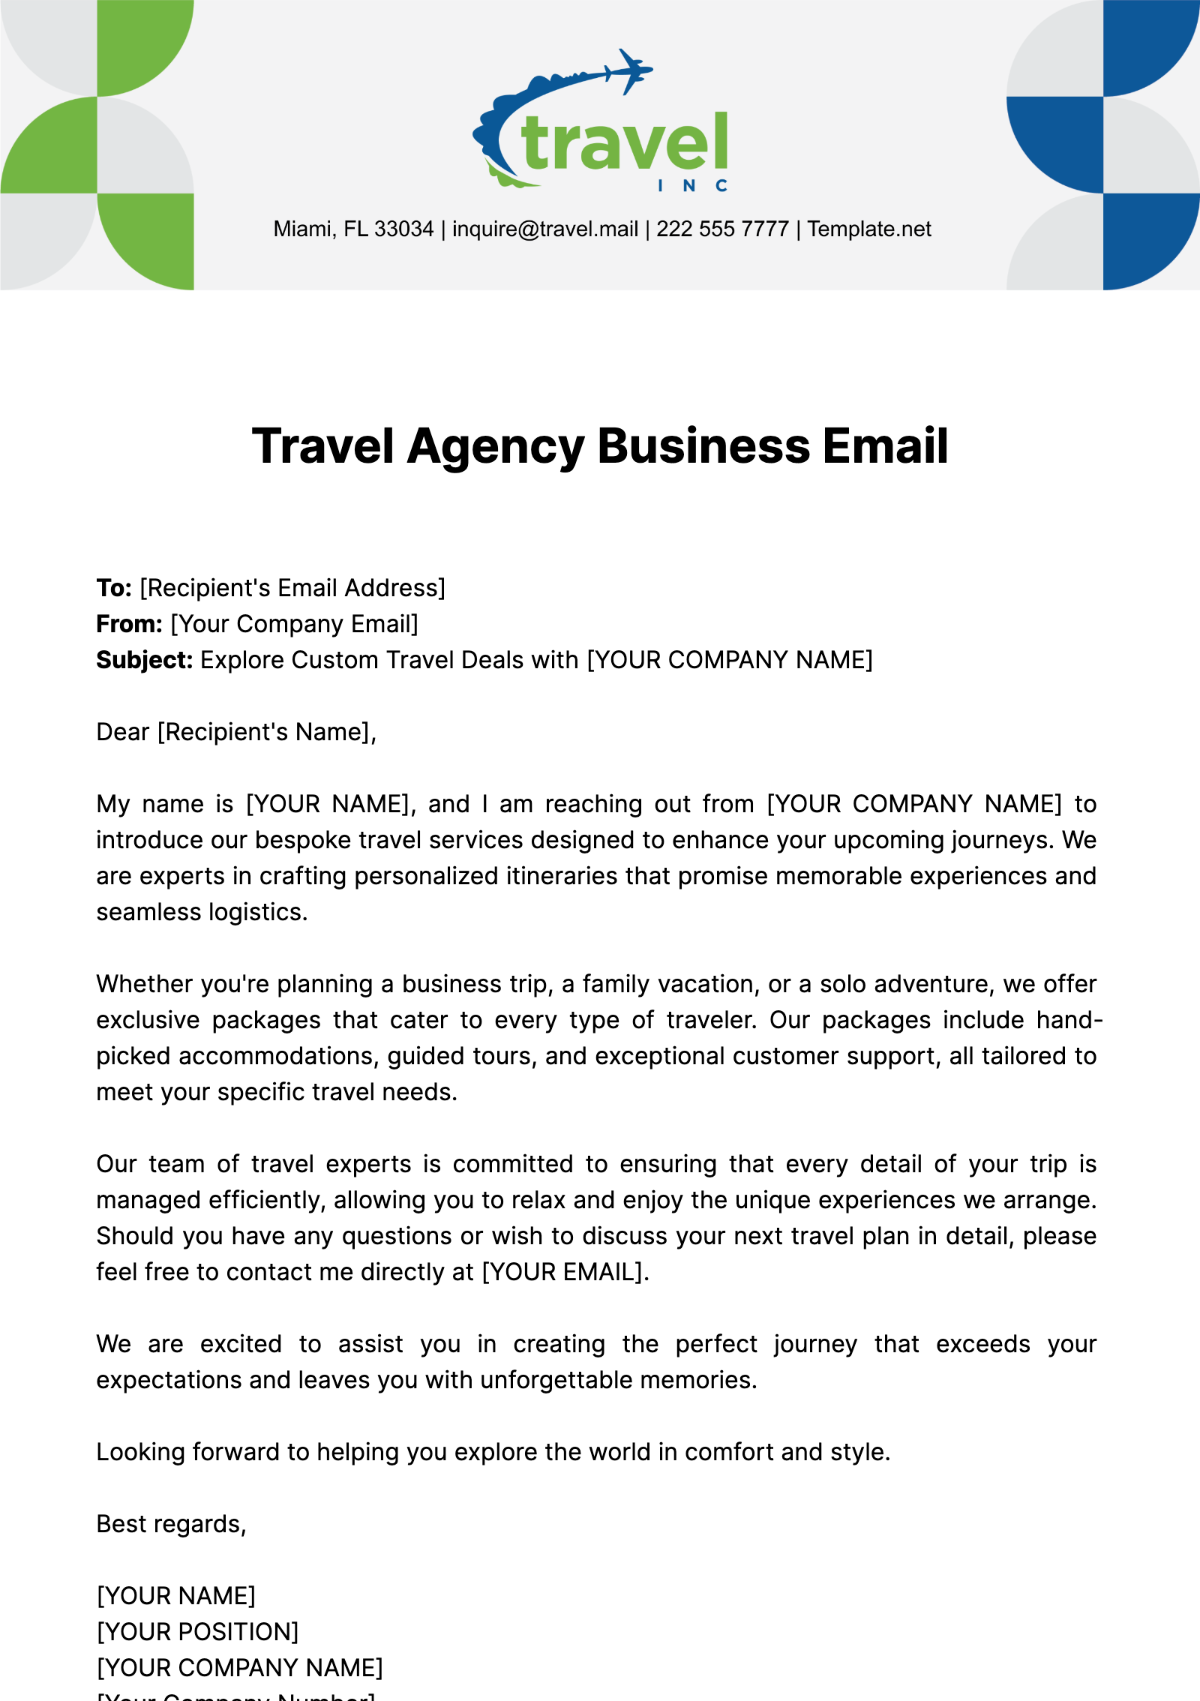 Travel Agency Business Email Template